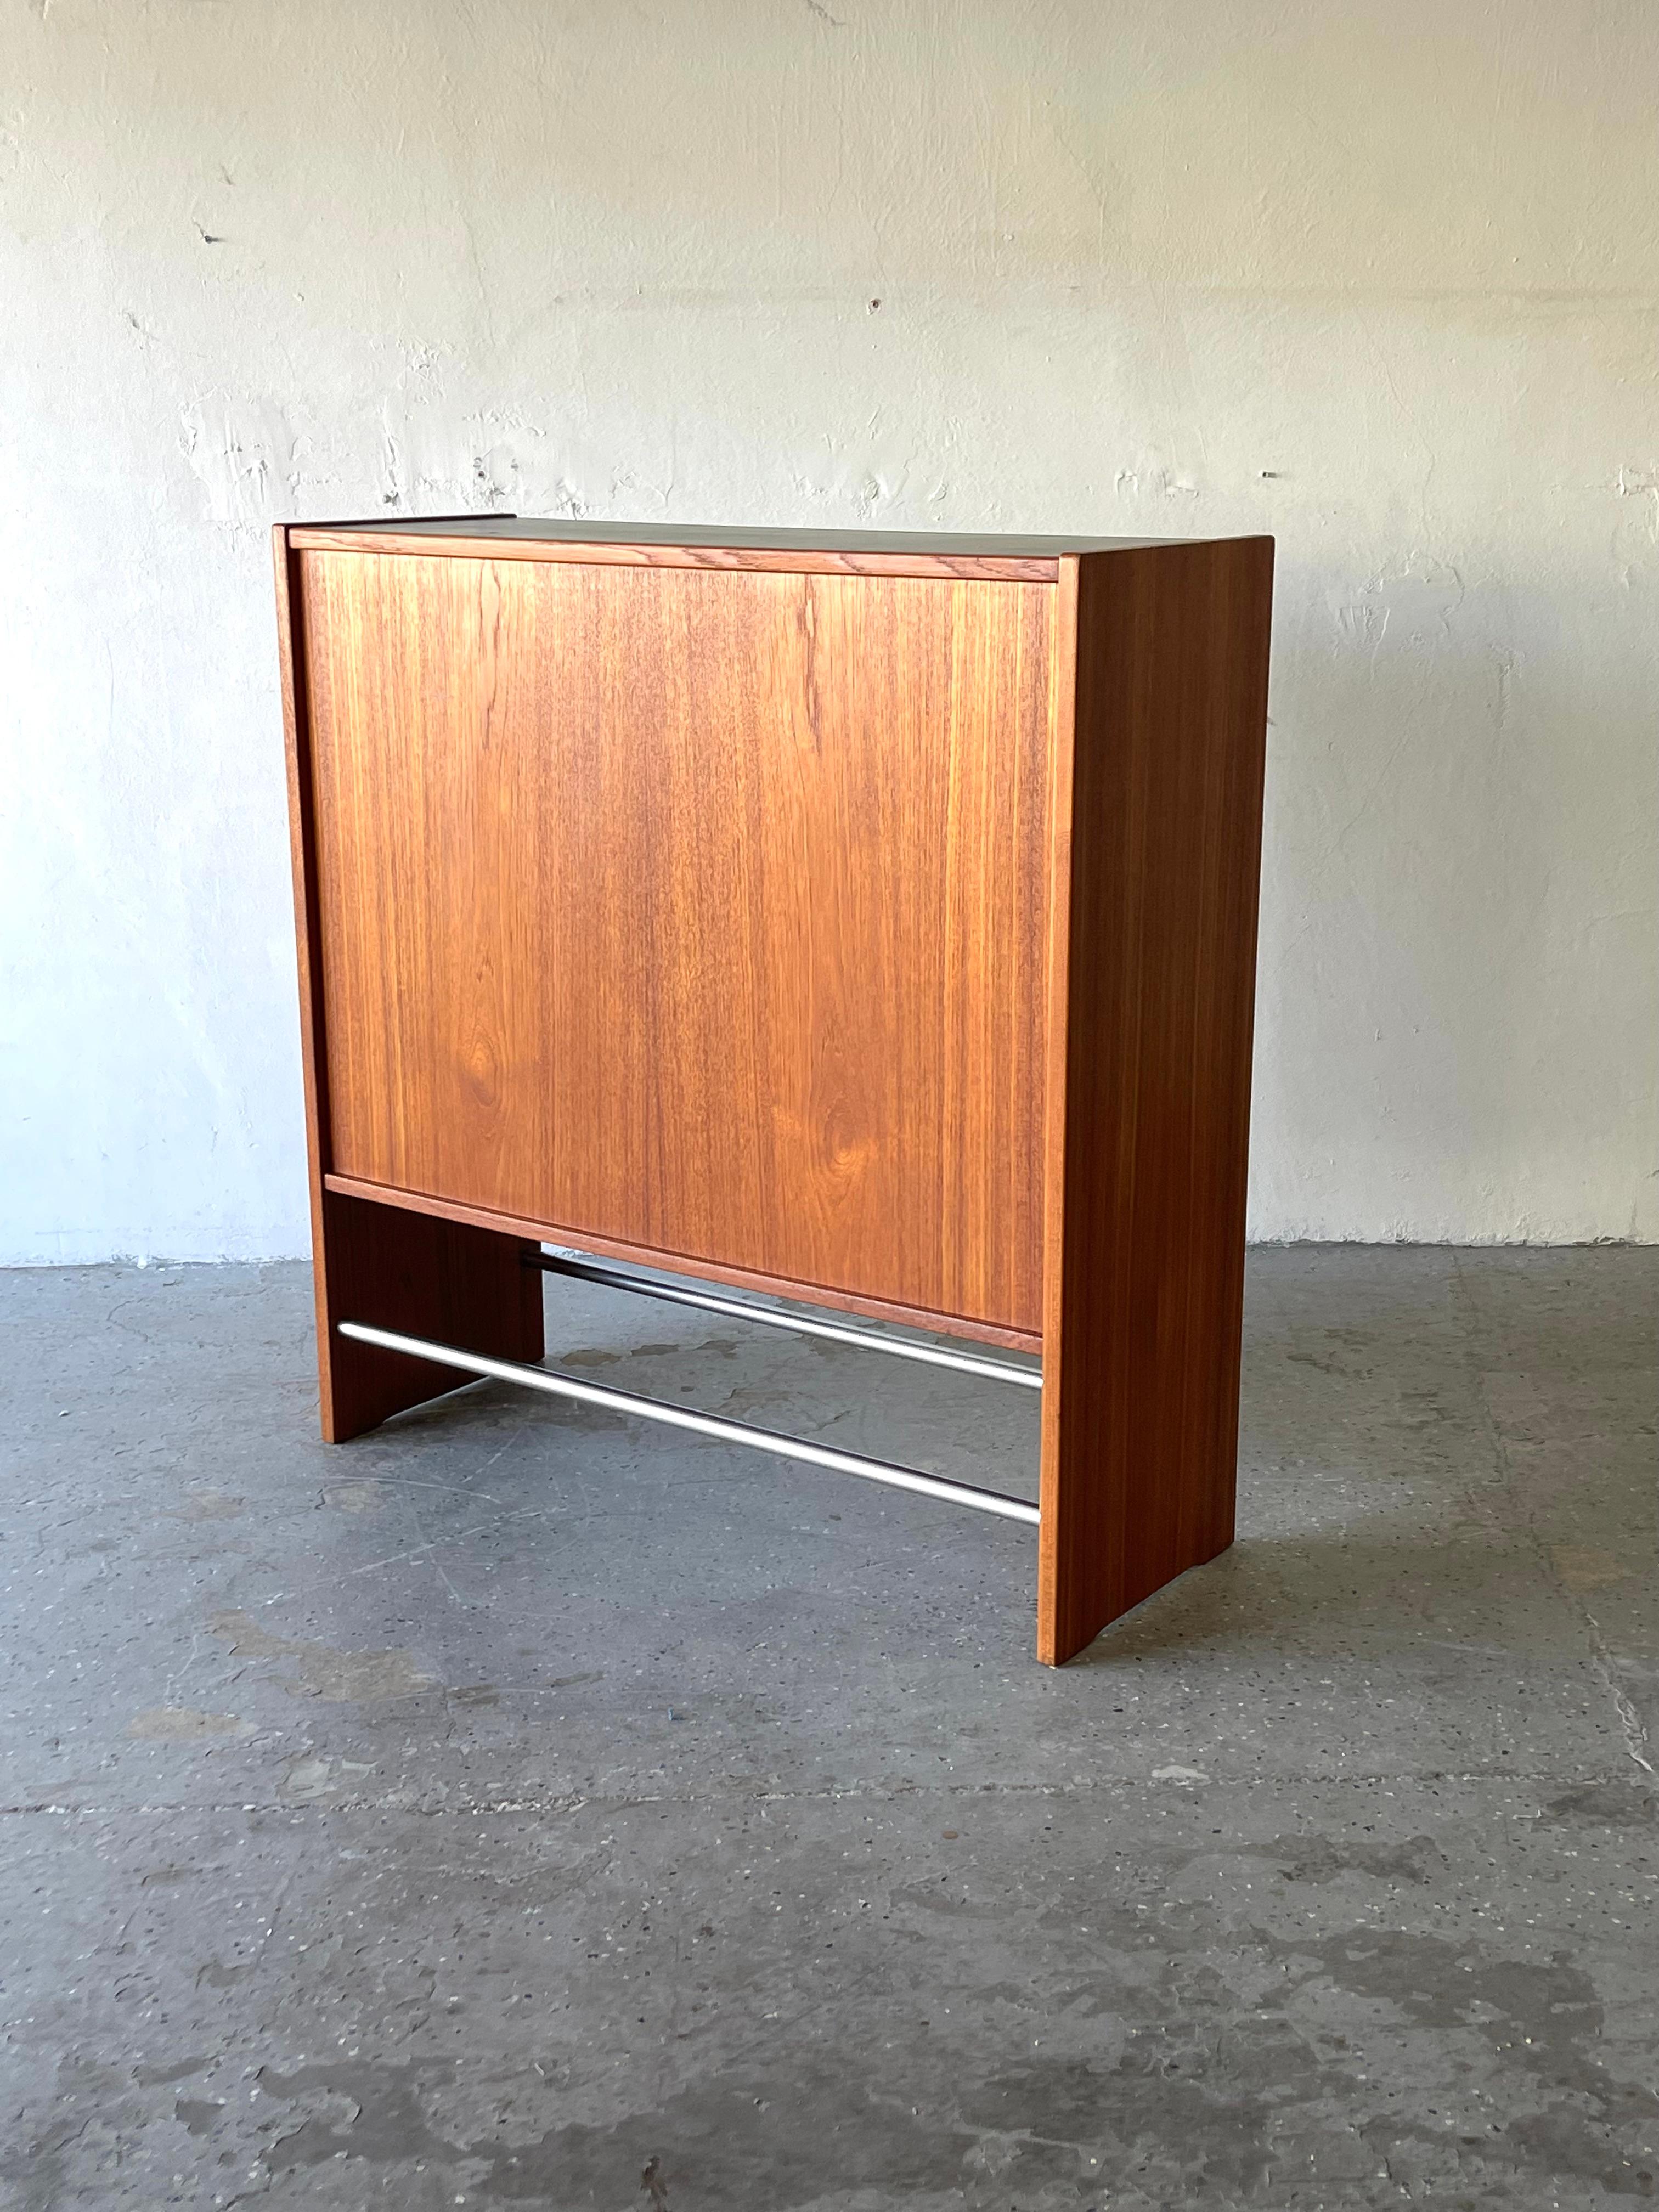 This teak danish modern dry bar by Erik Buch is Quite stunning.m Bar is in excellent vintage condition. It Has it original glass sliding doors. The black and gray round bottle housing makes a very cool contrast with the teak wood. 

Condition: